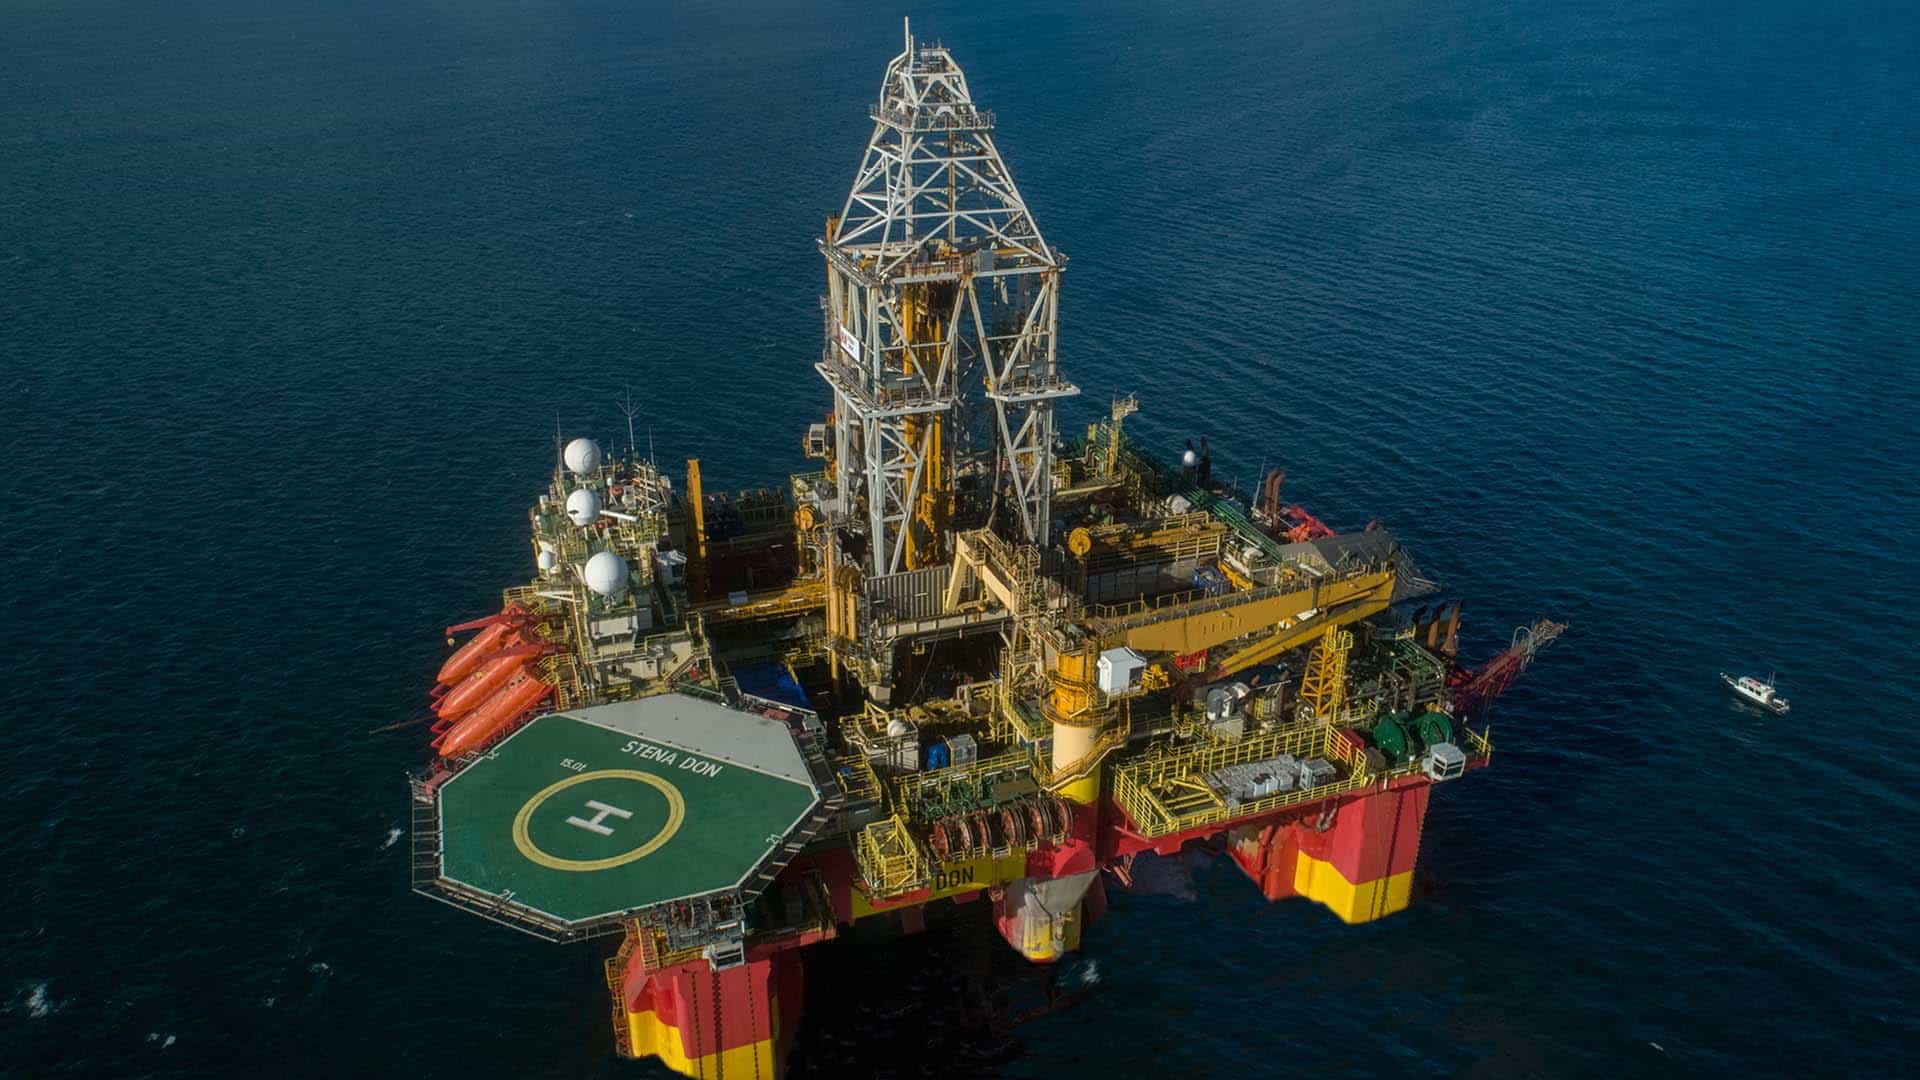 Chariot used the Stena Don rig for Anchois drilling